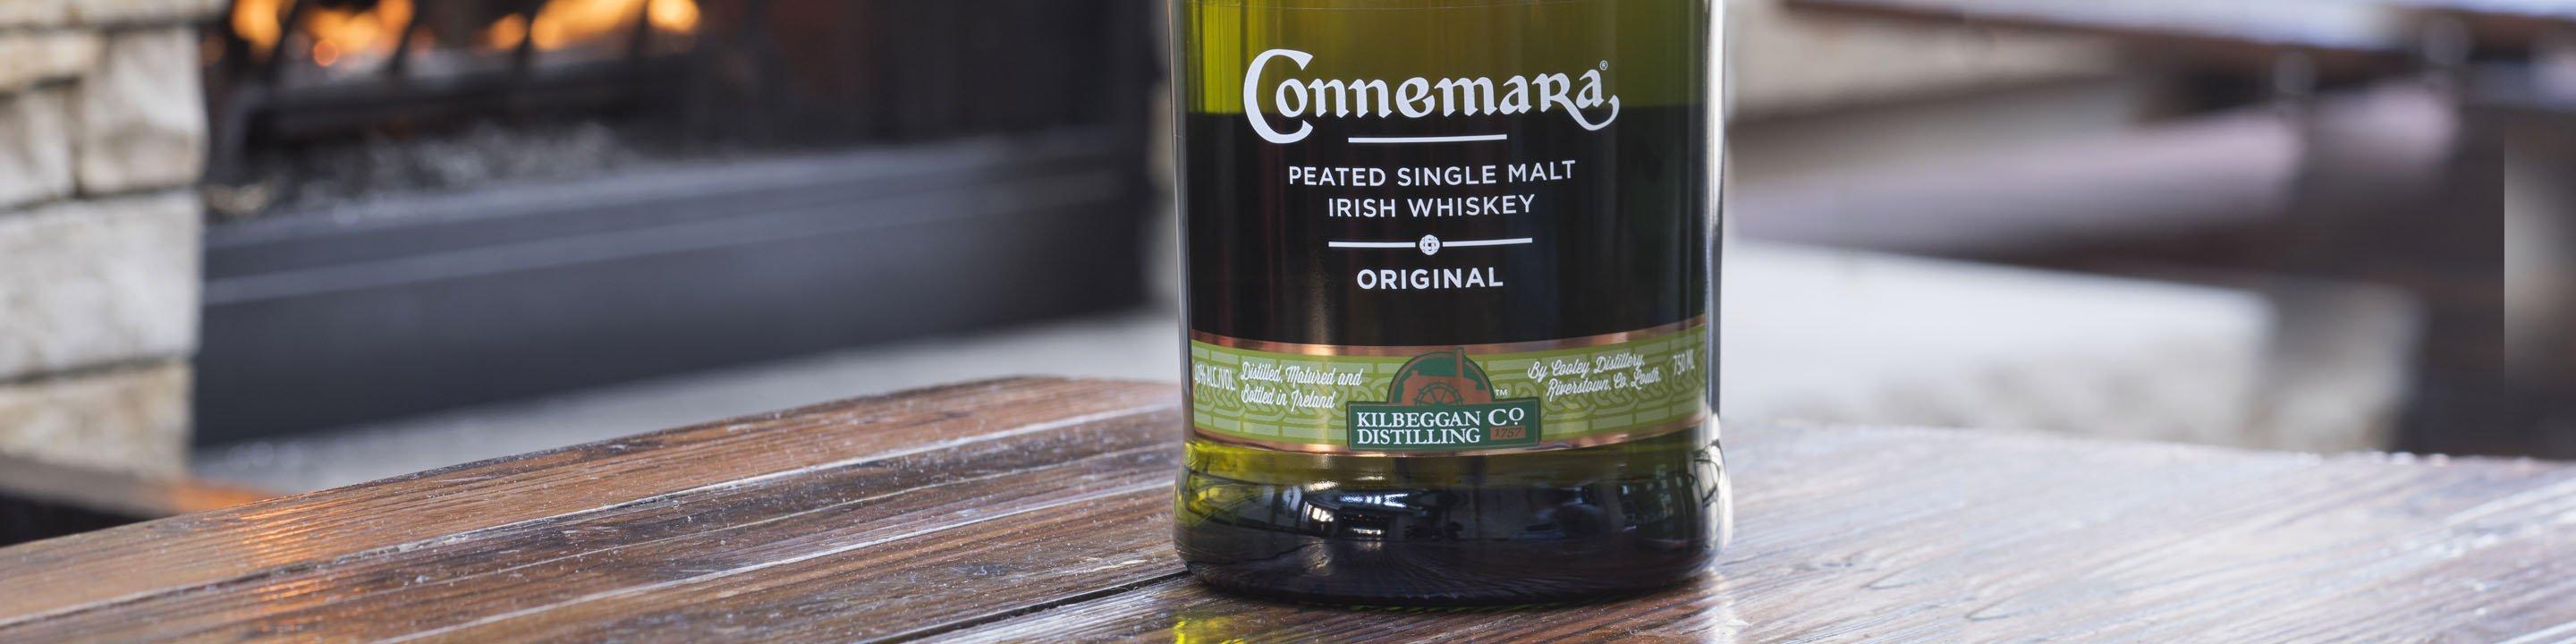 Inspired by Ireland’s ancient distilling traditions, Connemara’s® smooth sweet malt taste and complex peat flavours makes it a truly unique Irish whiskey. Connemara® allows you to unearth the Peated Pleasures of Ireland. 

Buy Connemara online now from nearby liquor stores via Minibar Delivery. 